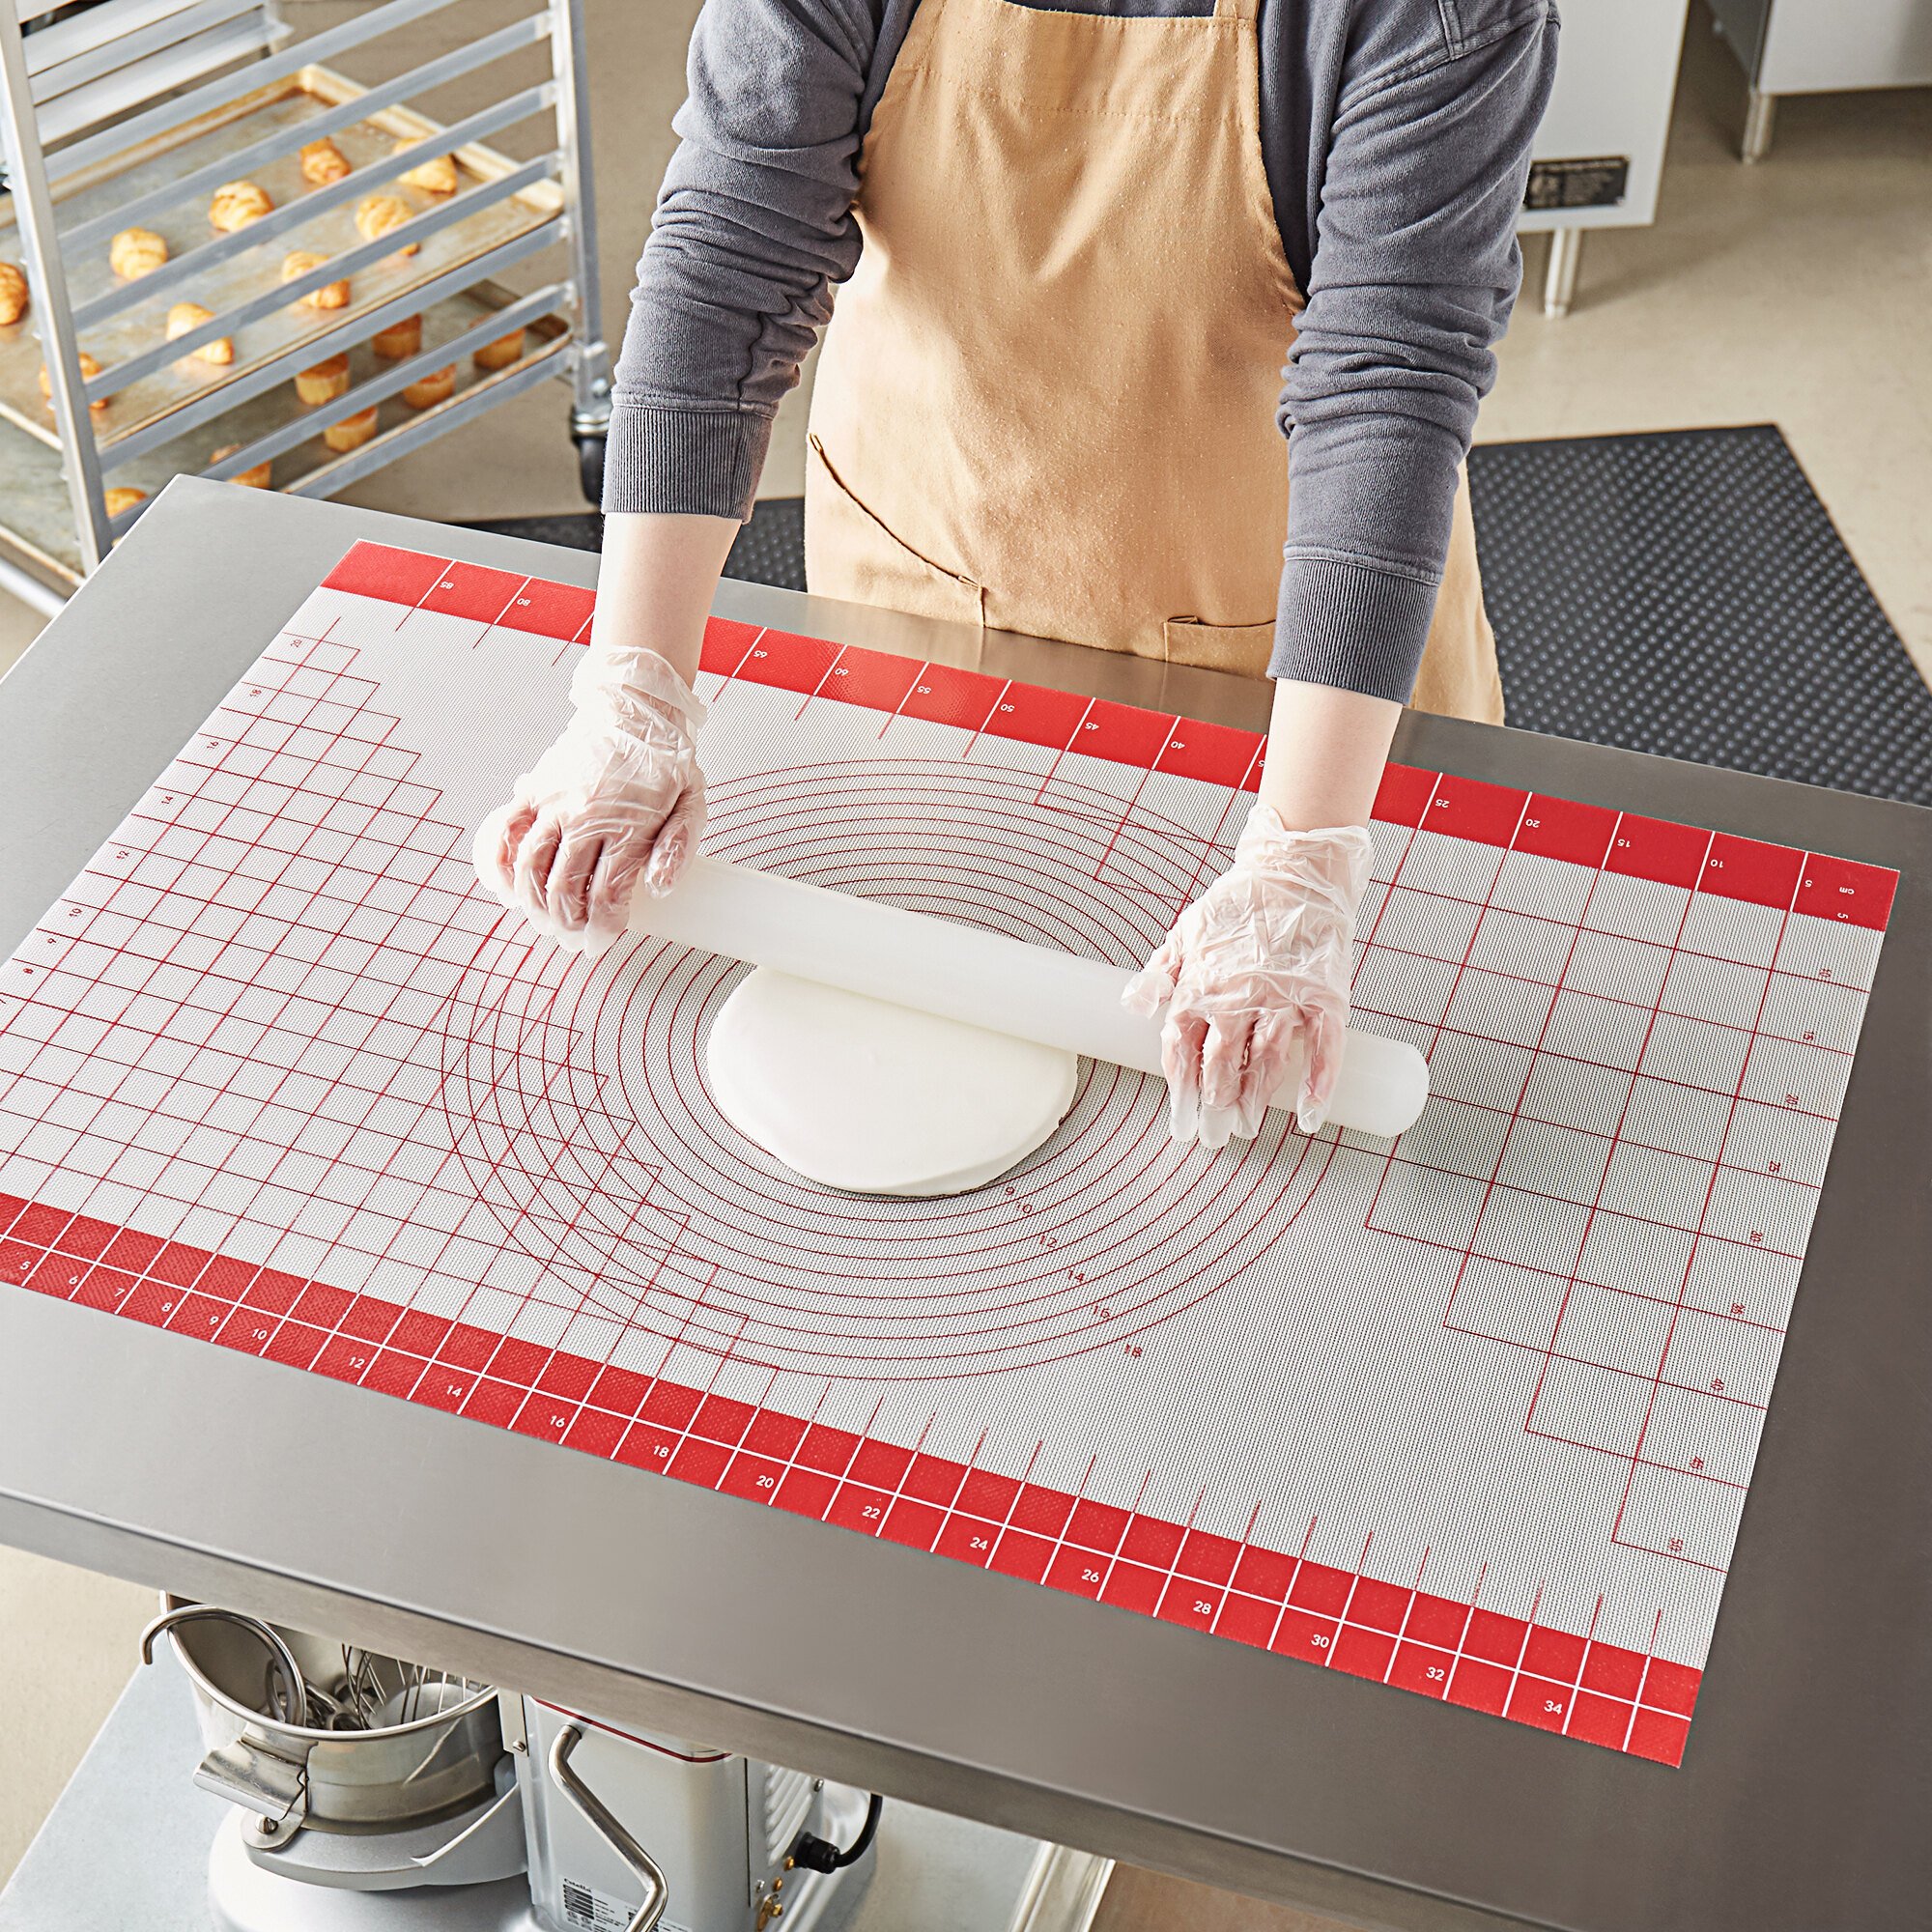 A person rolling out cake fondant on a baking mat.